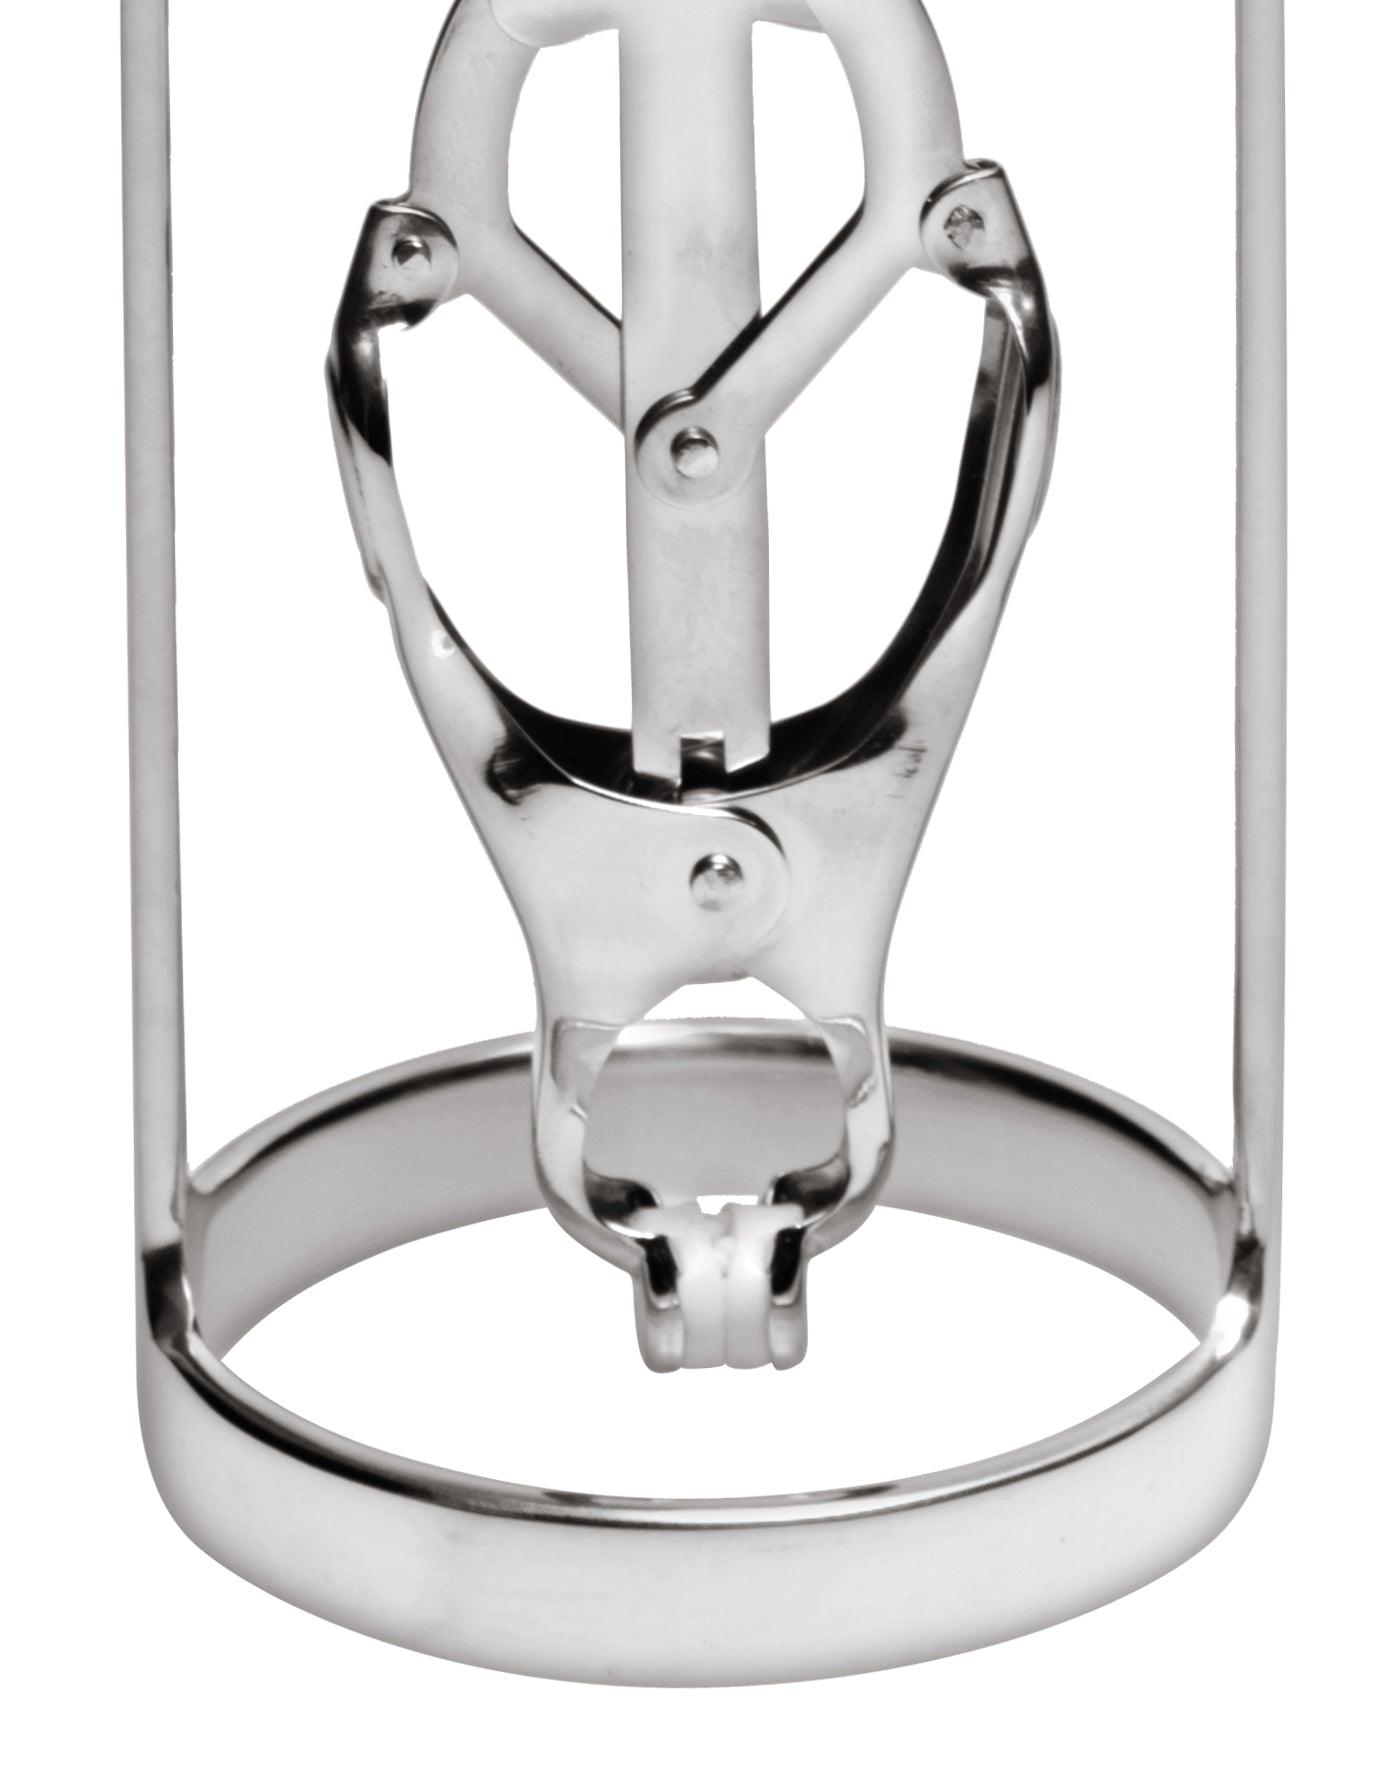 Stainless Steel Clover Clamp Nipple Stretcher - Take A Peek